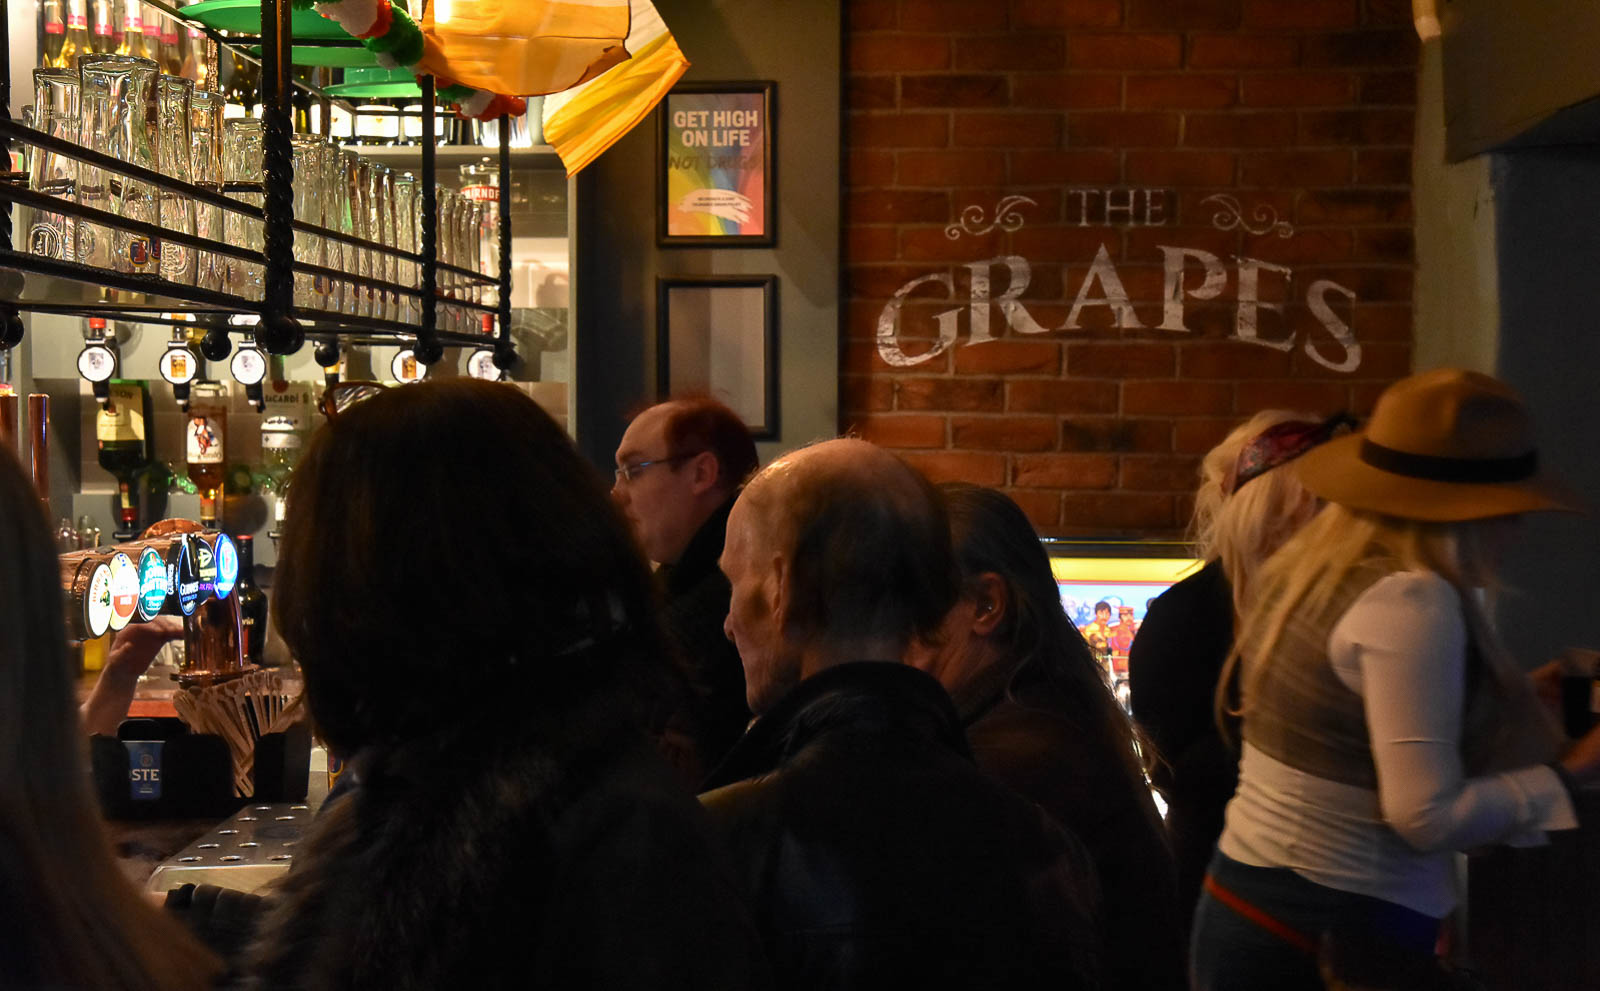 The Grapes Liverpool